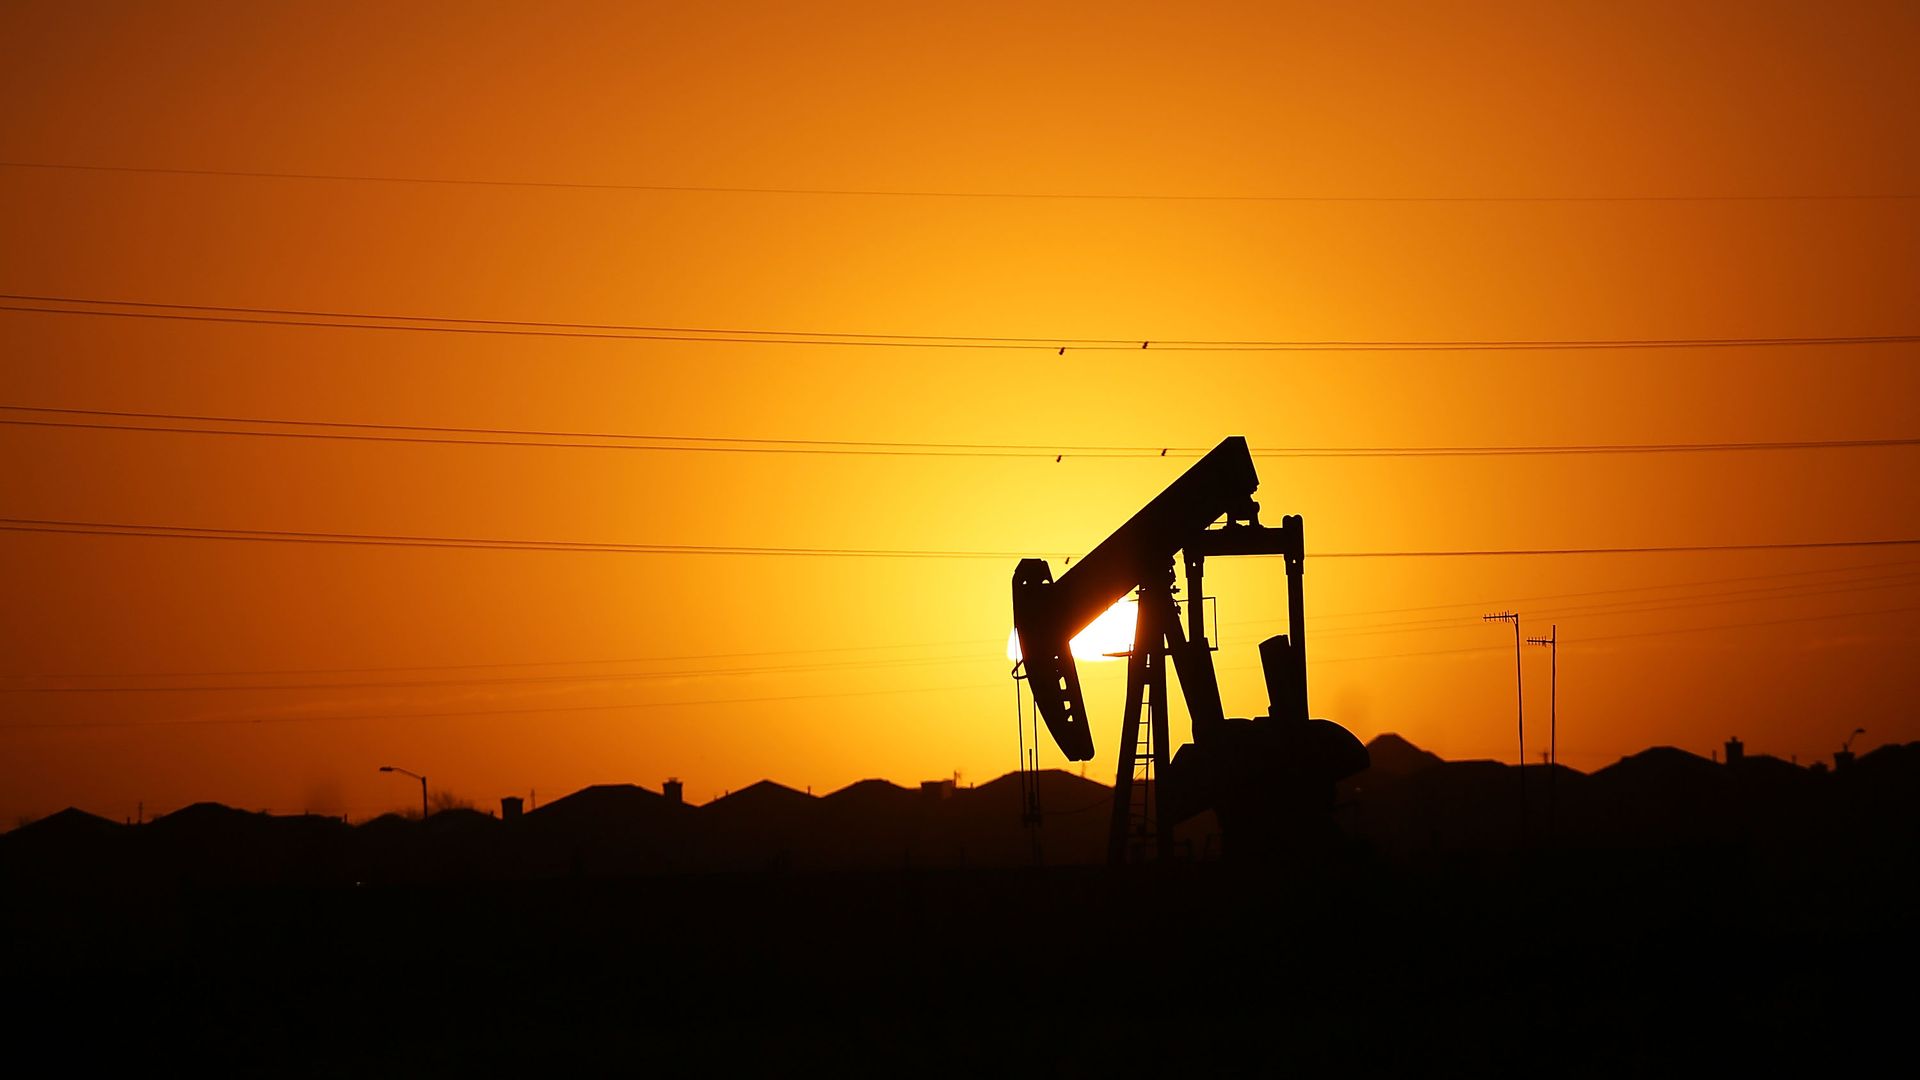 A oil pump in Texas at sunset